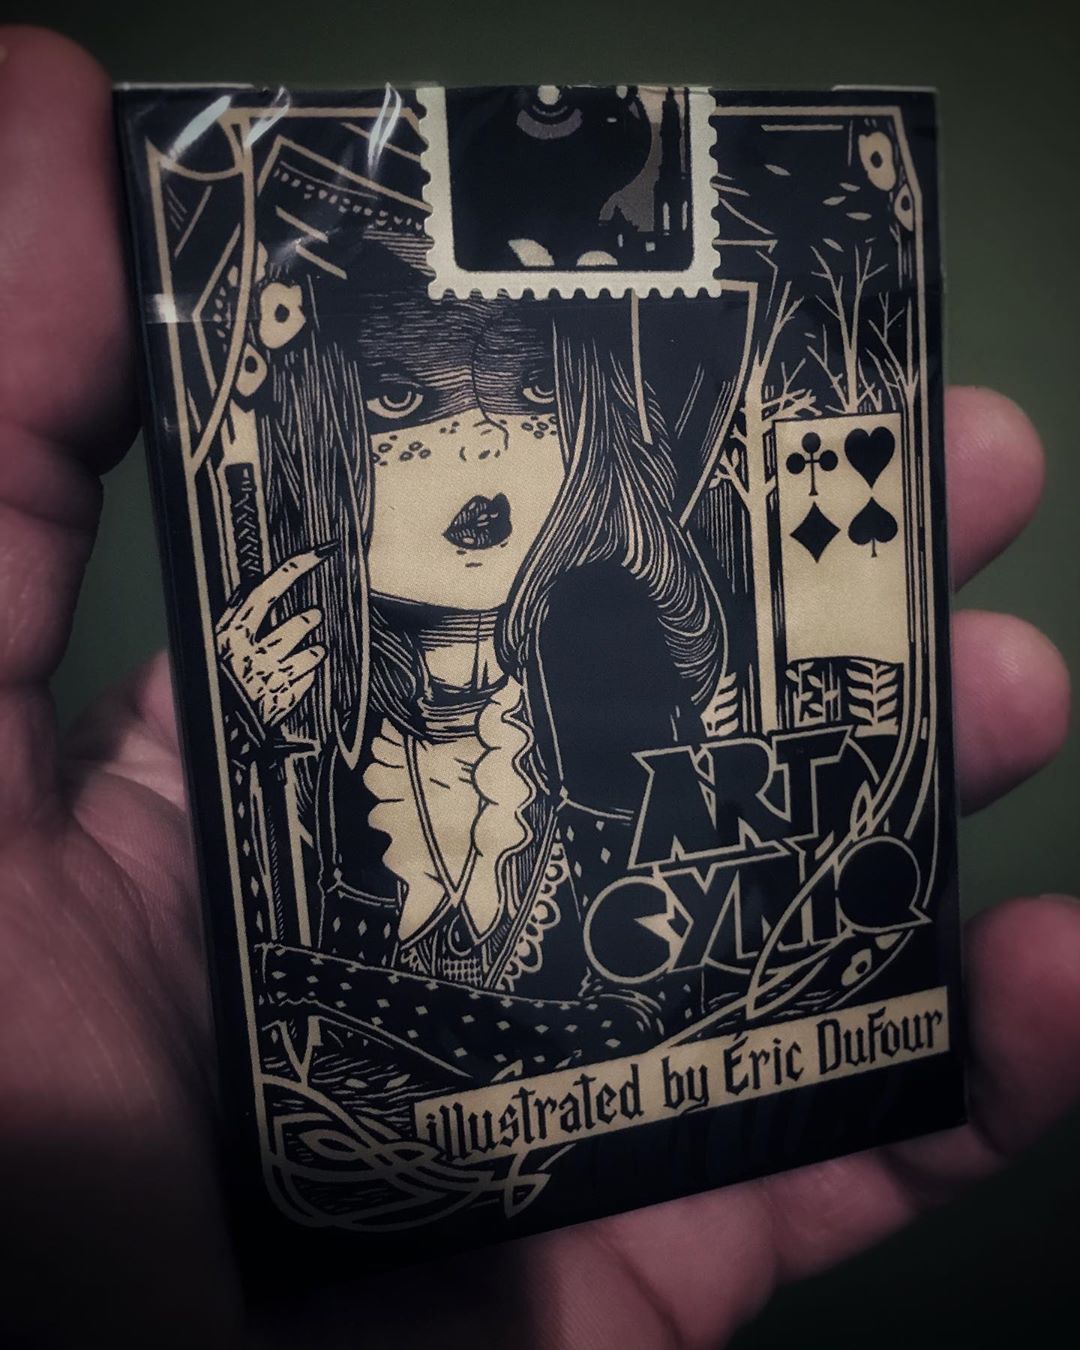 Today I got my new poker cardset by @artcyniq  And I must say it‘s a MUST HAVE!!